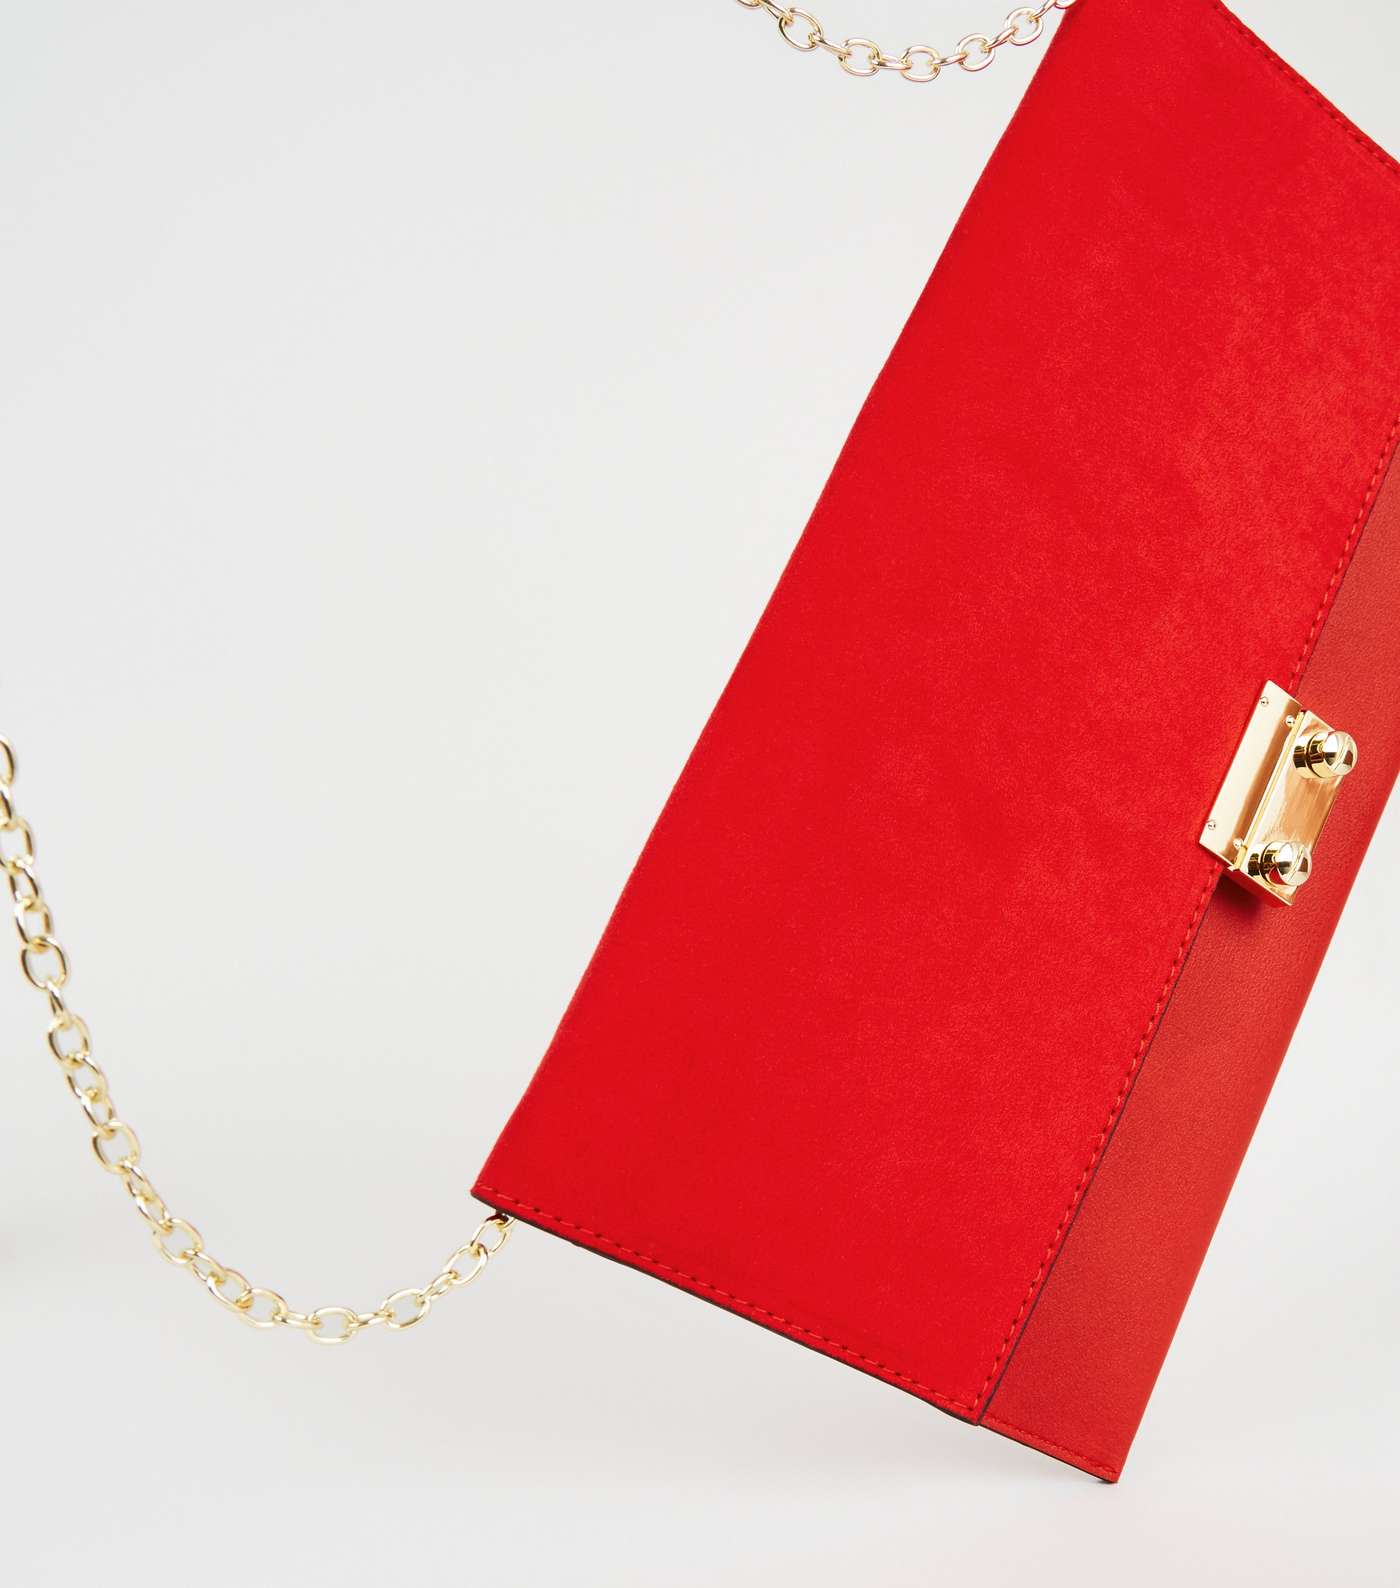 Red Leather-Look Suedette Clutch Bag Image 4